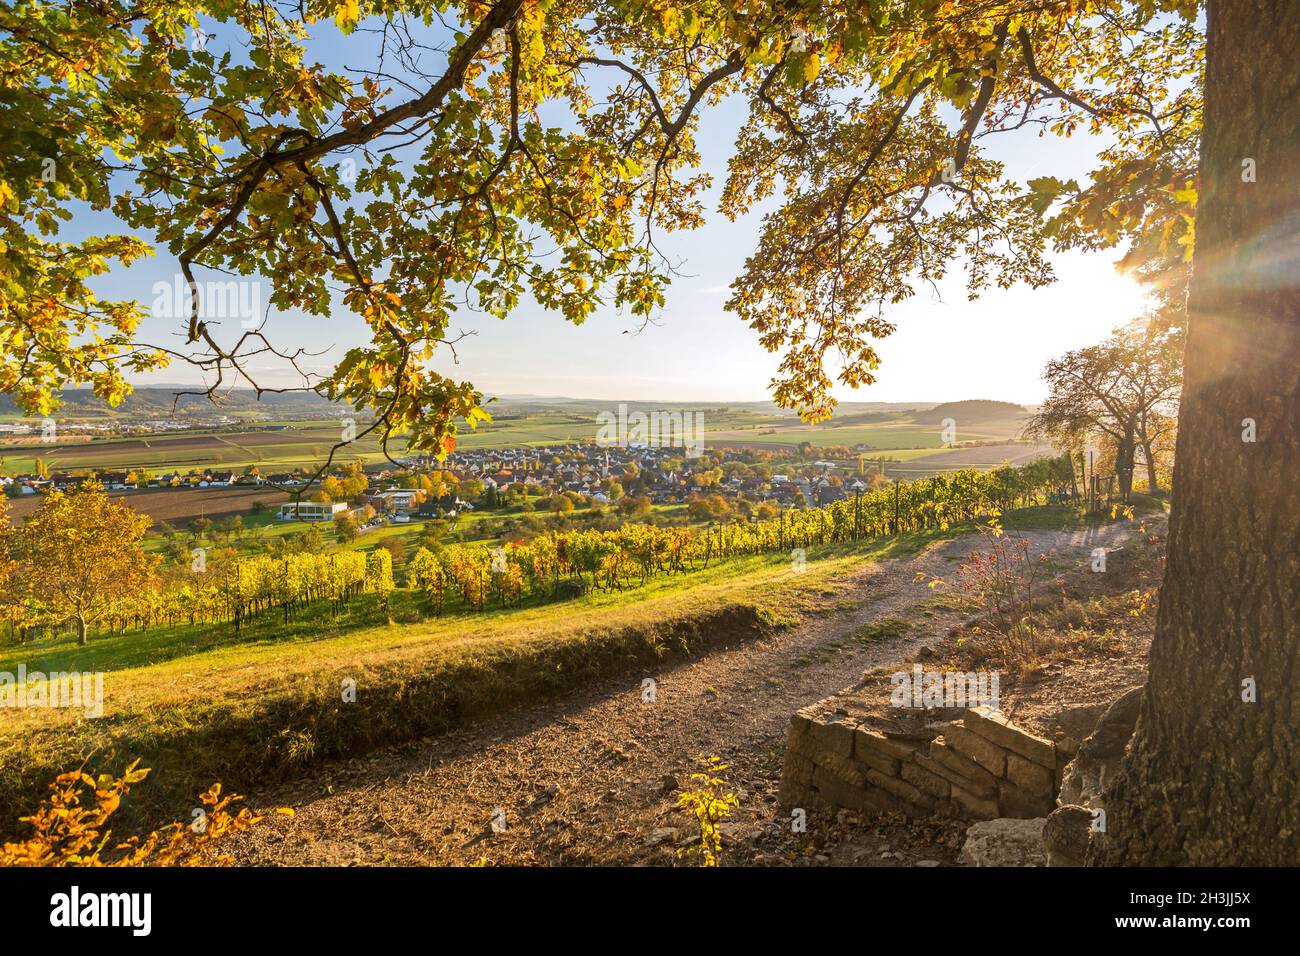 View through autumnal tree branches onto scenic vineyard, village, and valley at sunset in Southern Germany Stock Photo